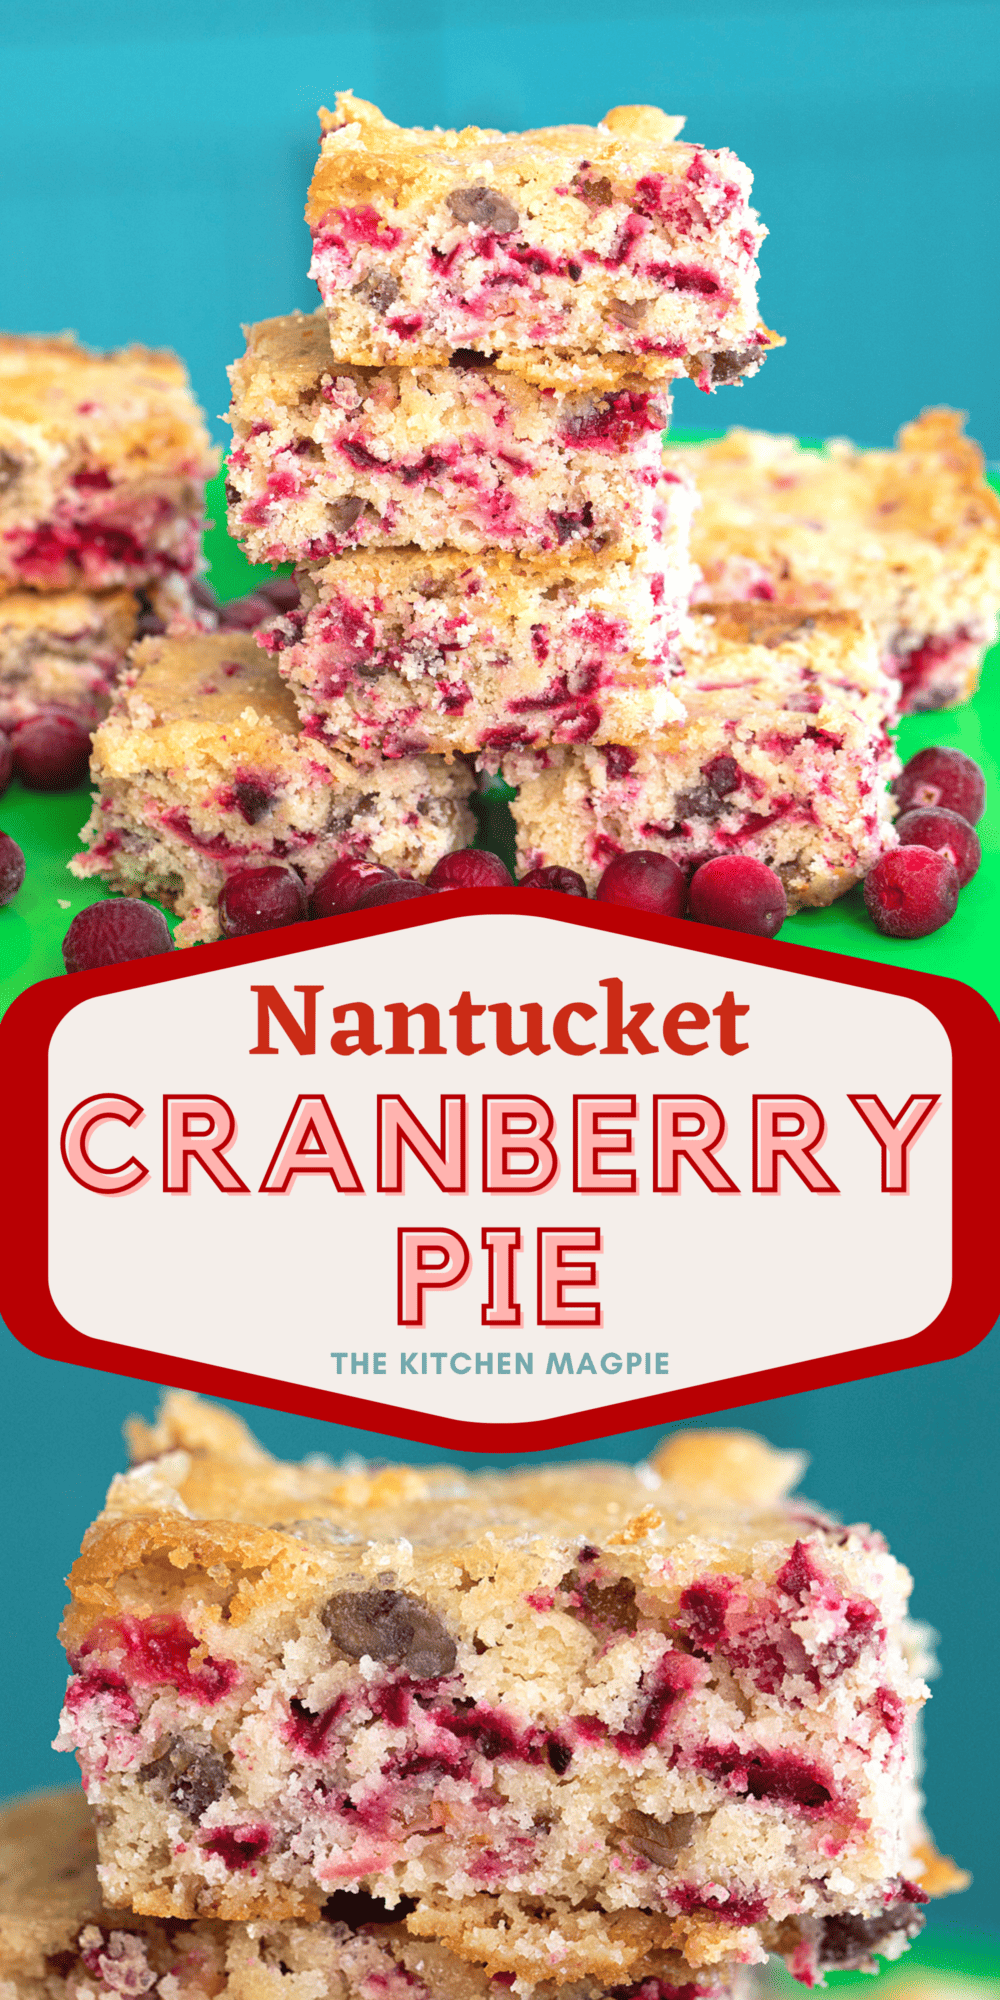 This Nantucket cranberry pie is more of a cake than a pie, a delicious contrast between lightly tart cranberries and sweet cake with pecans.